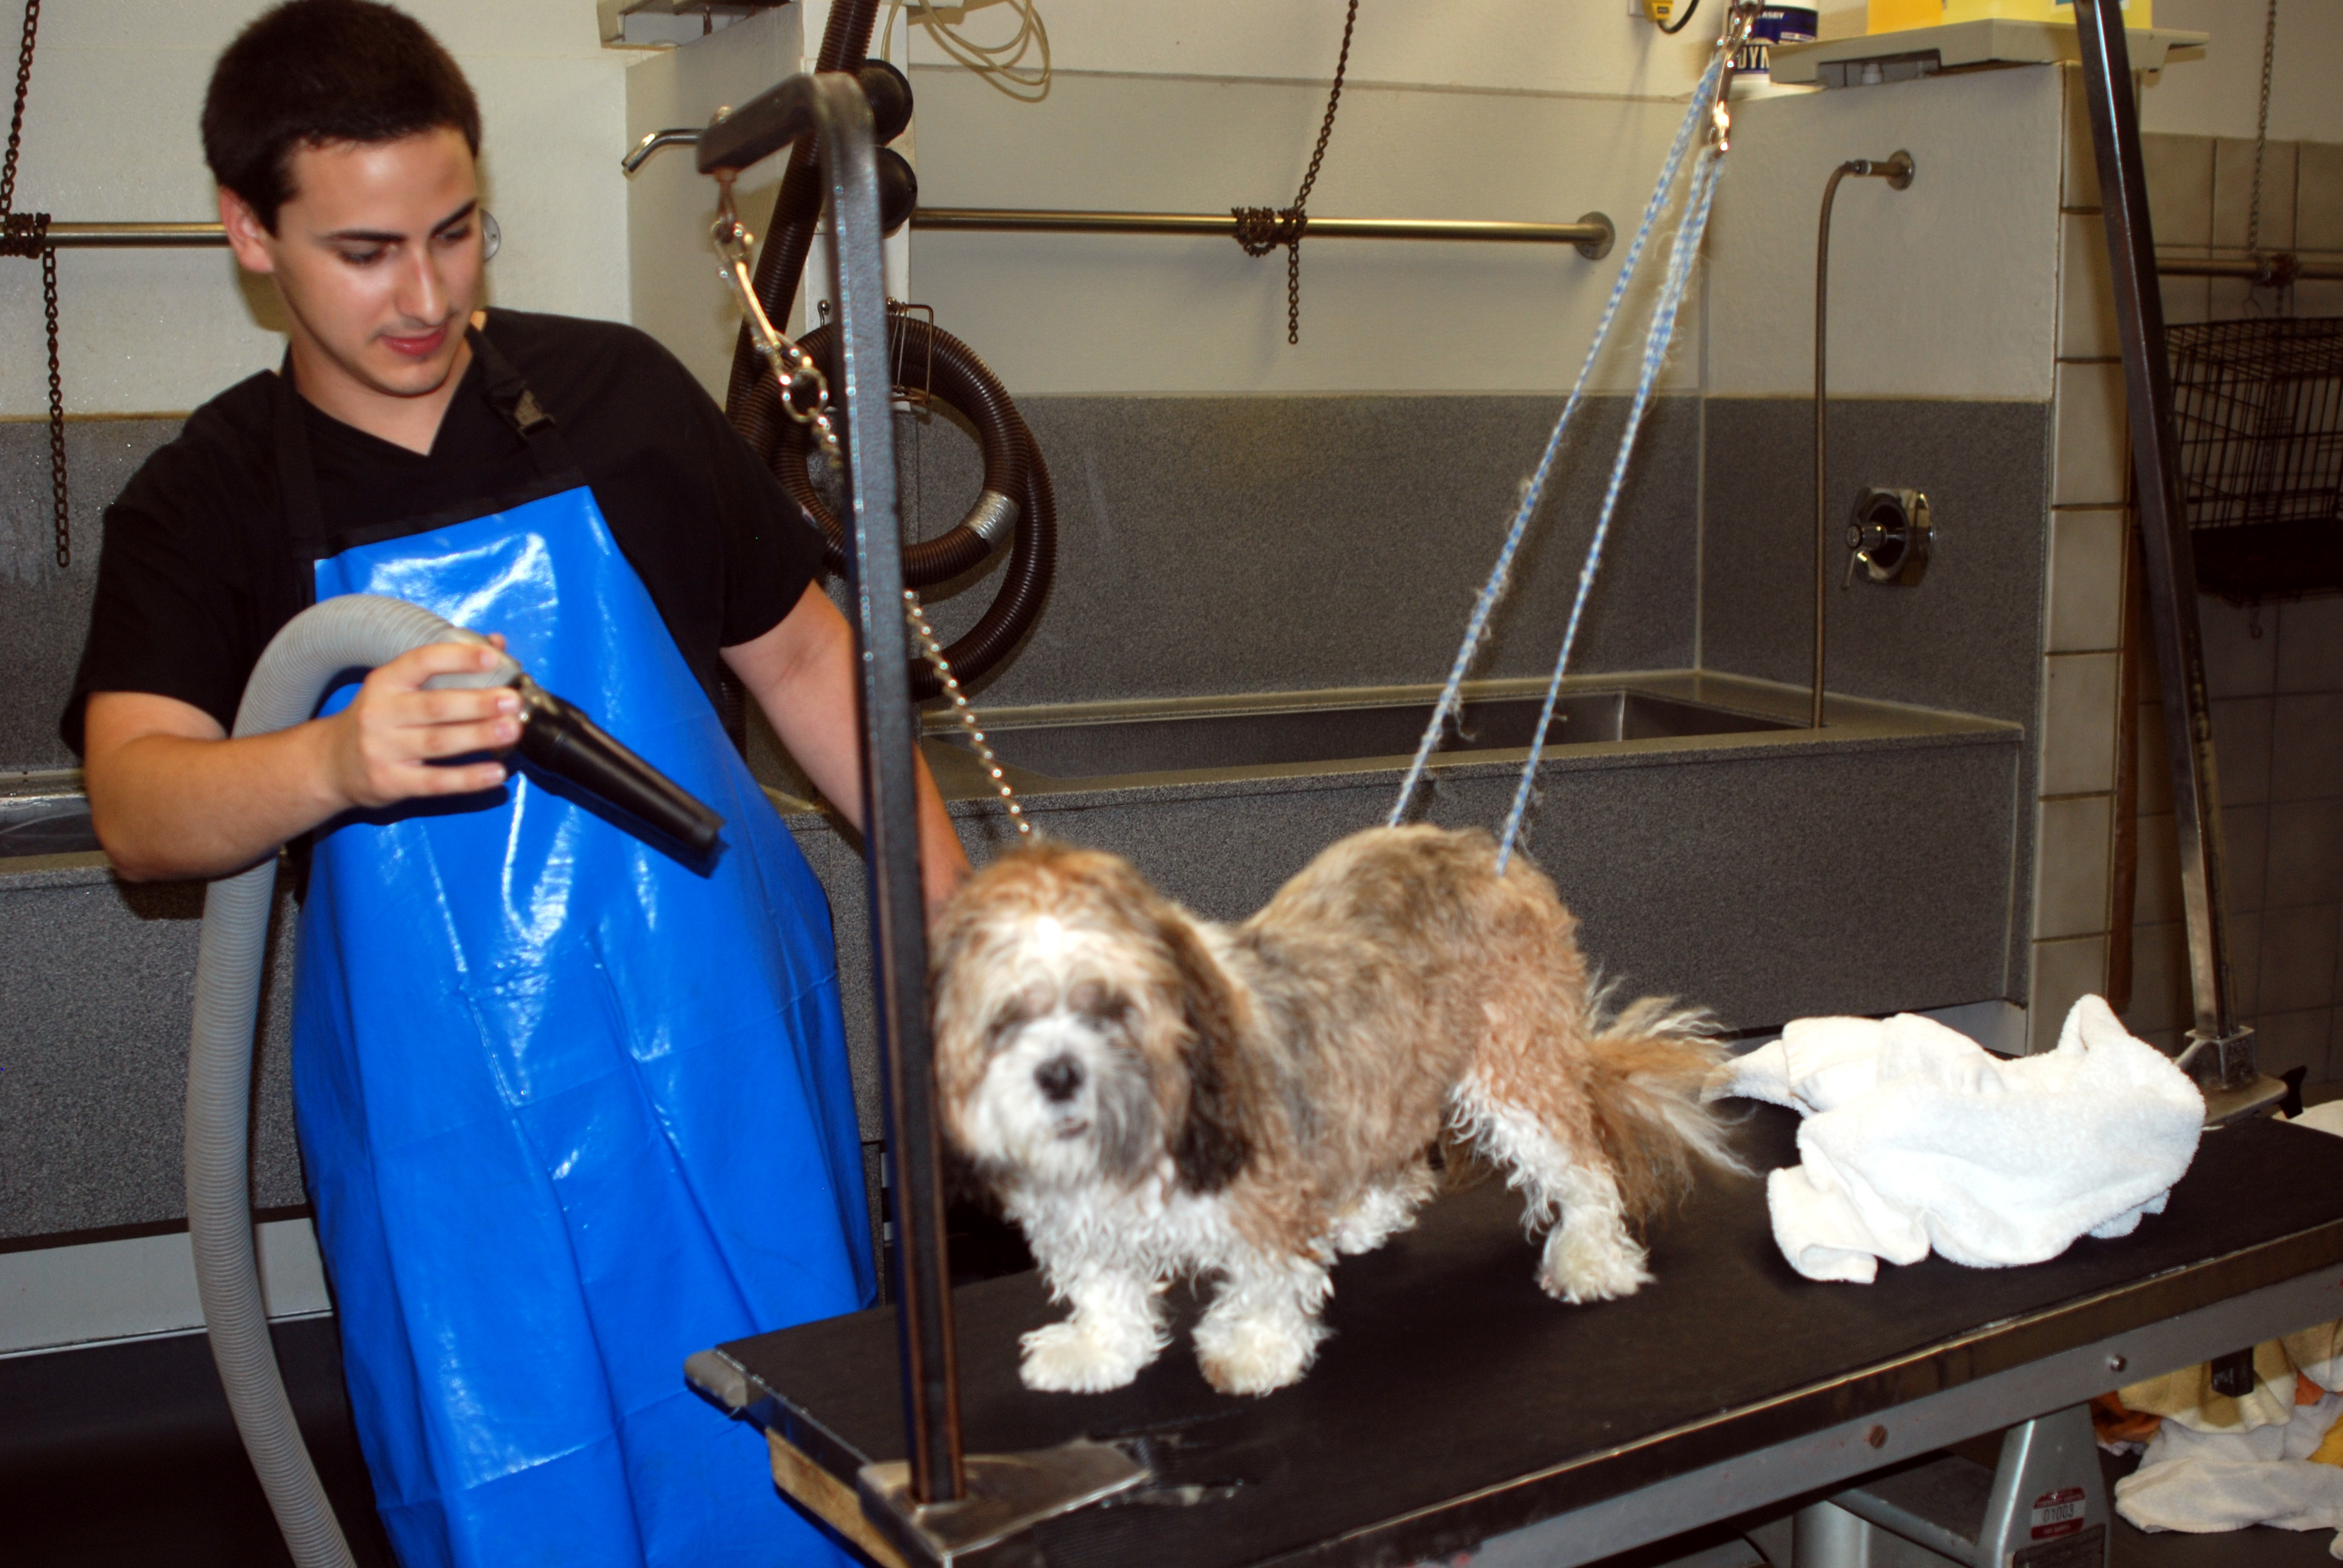 Sunnycrest Animal Care Center Grooming and bathing